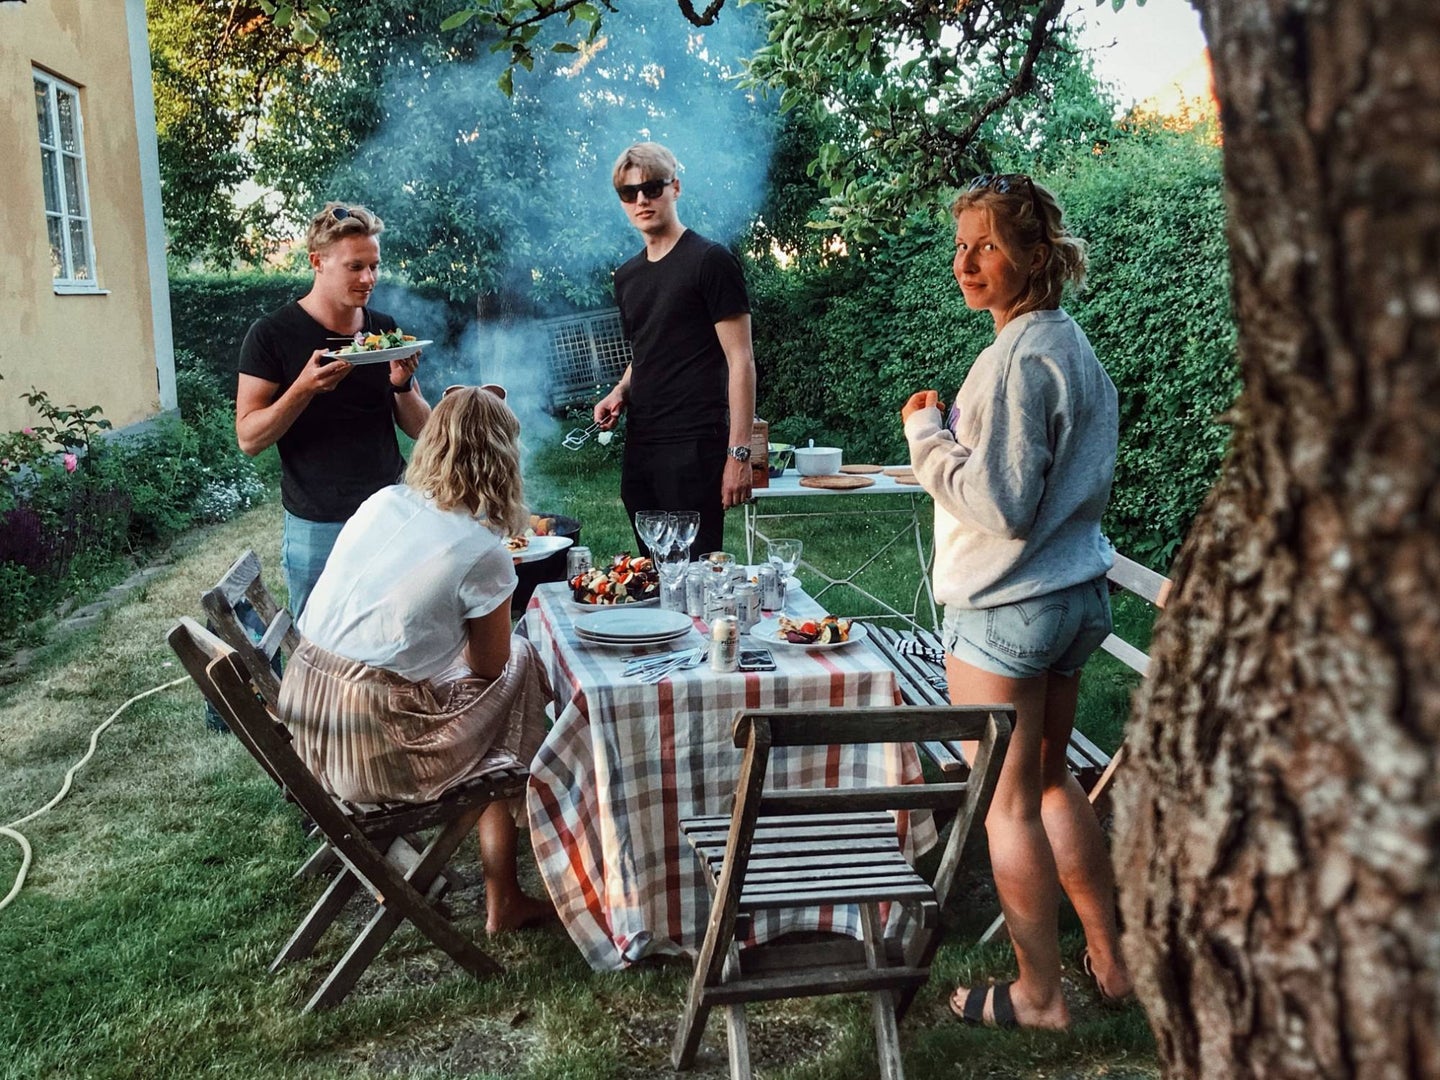 People having an outdoor barbecue